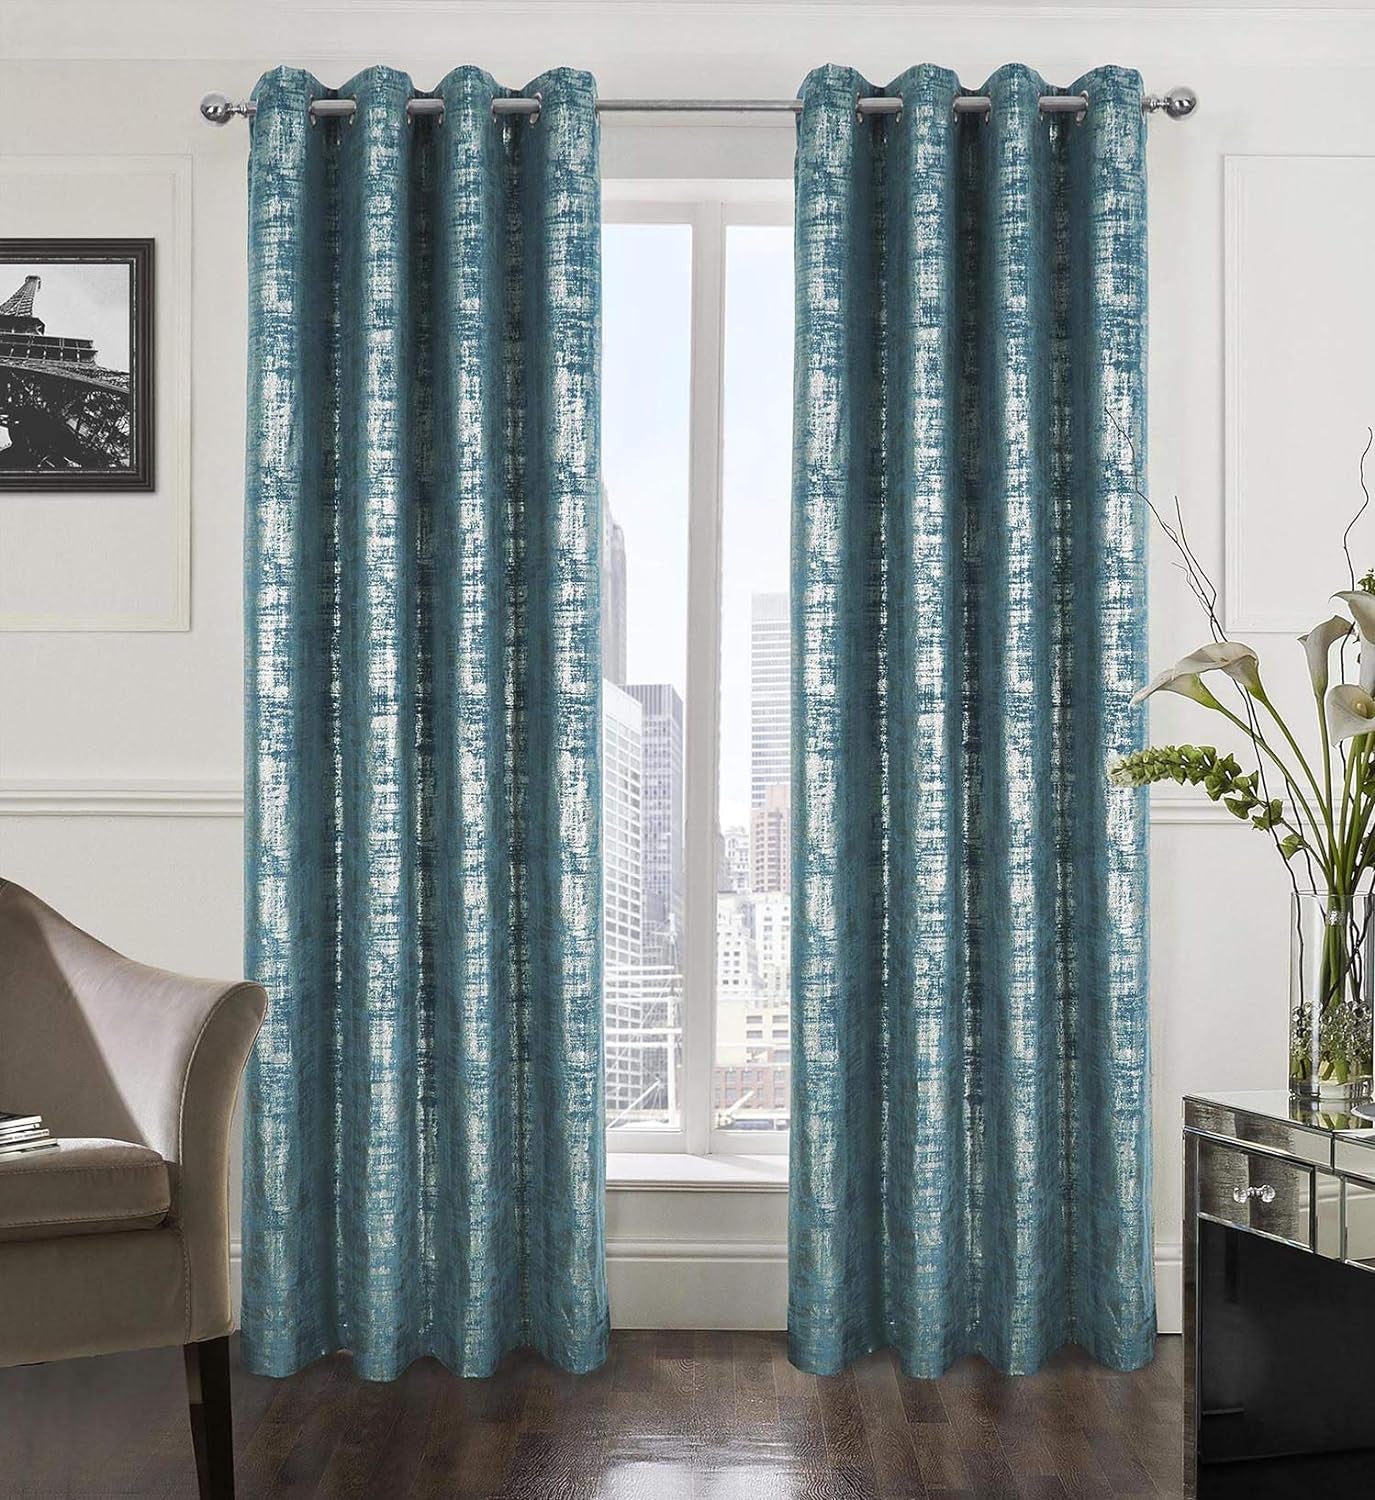 Always4U Soft Velvet Curtains 95 Inch Length Luxury Bedroom Curtains Gold Foil Print Window Curtains for Living Room 1 Panel White  always4u Teal (Silver Print) 2 Panels: 52''W*84''L 